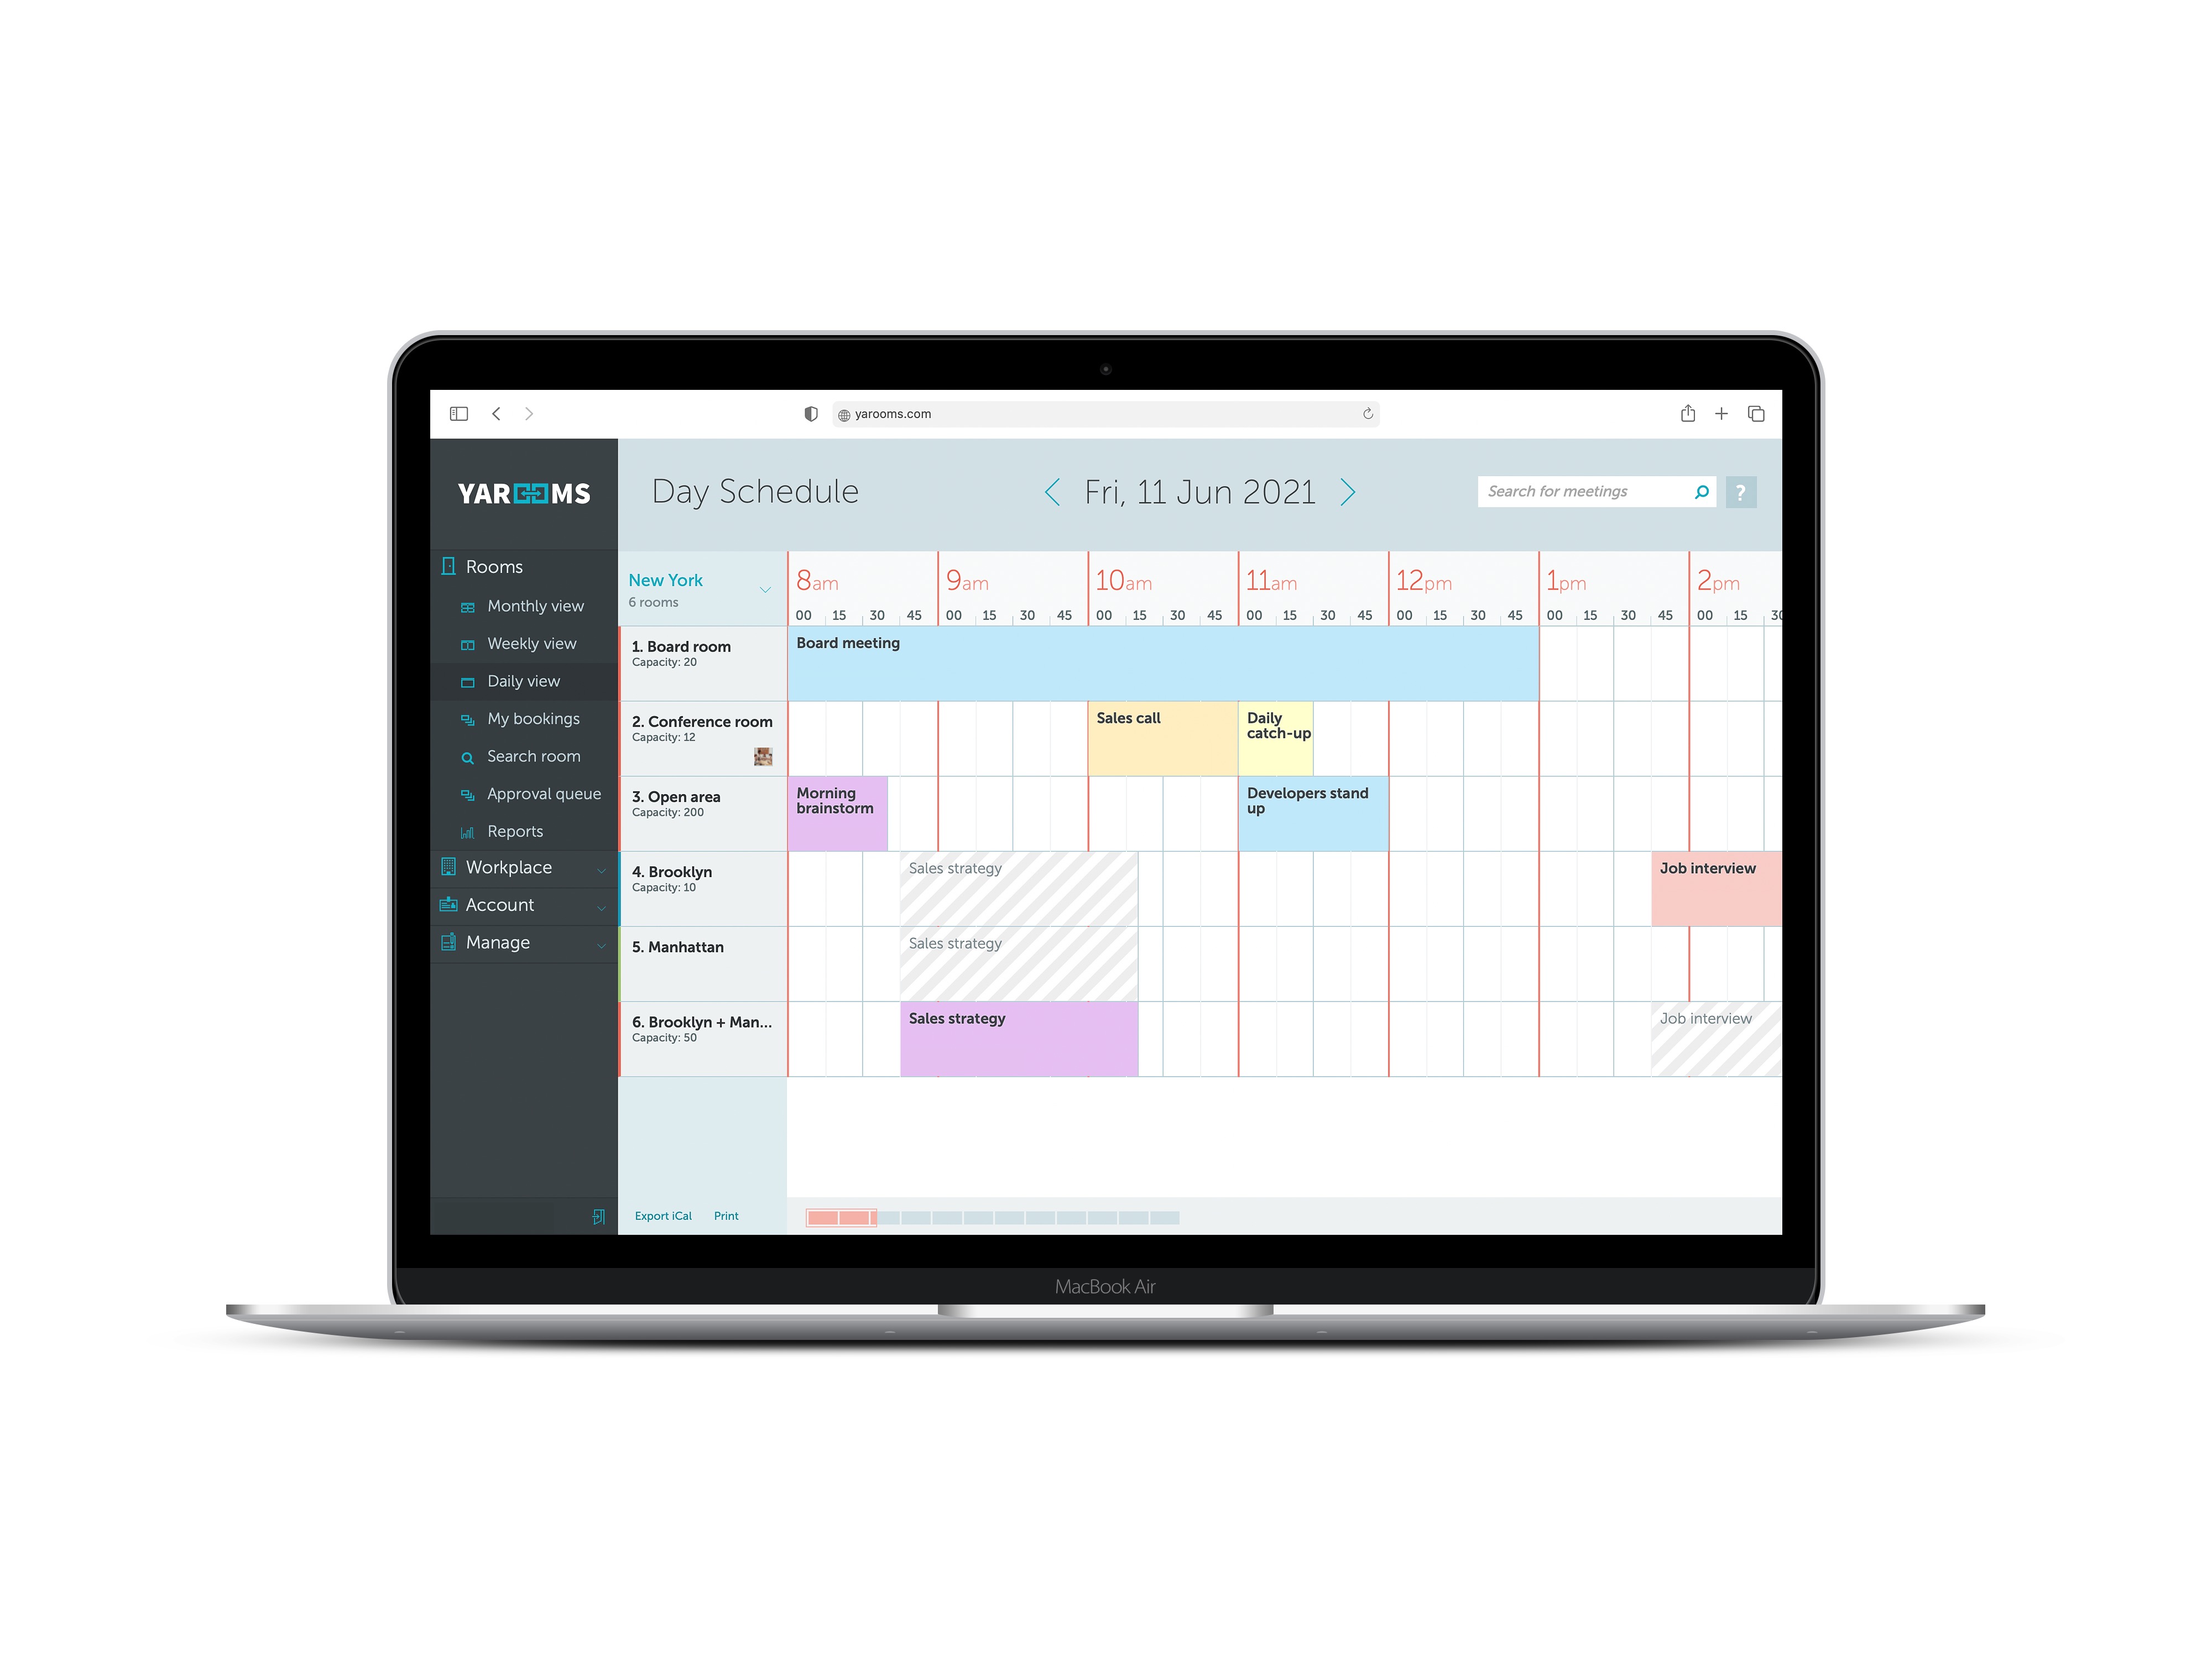 One shared space calendar. All room bookings are in a single place. Users only see what they have access to.